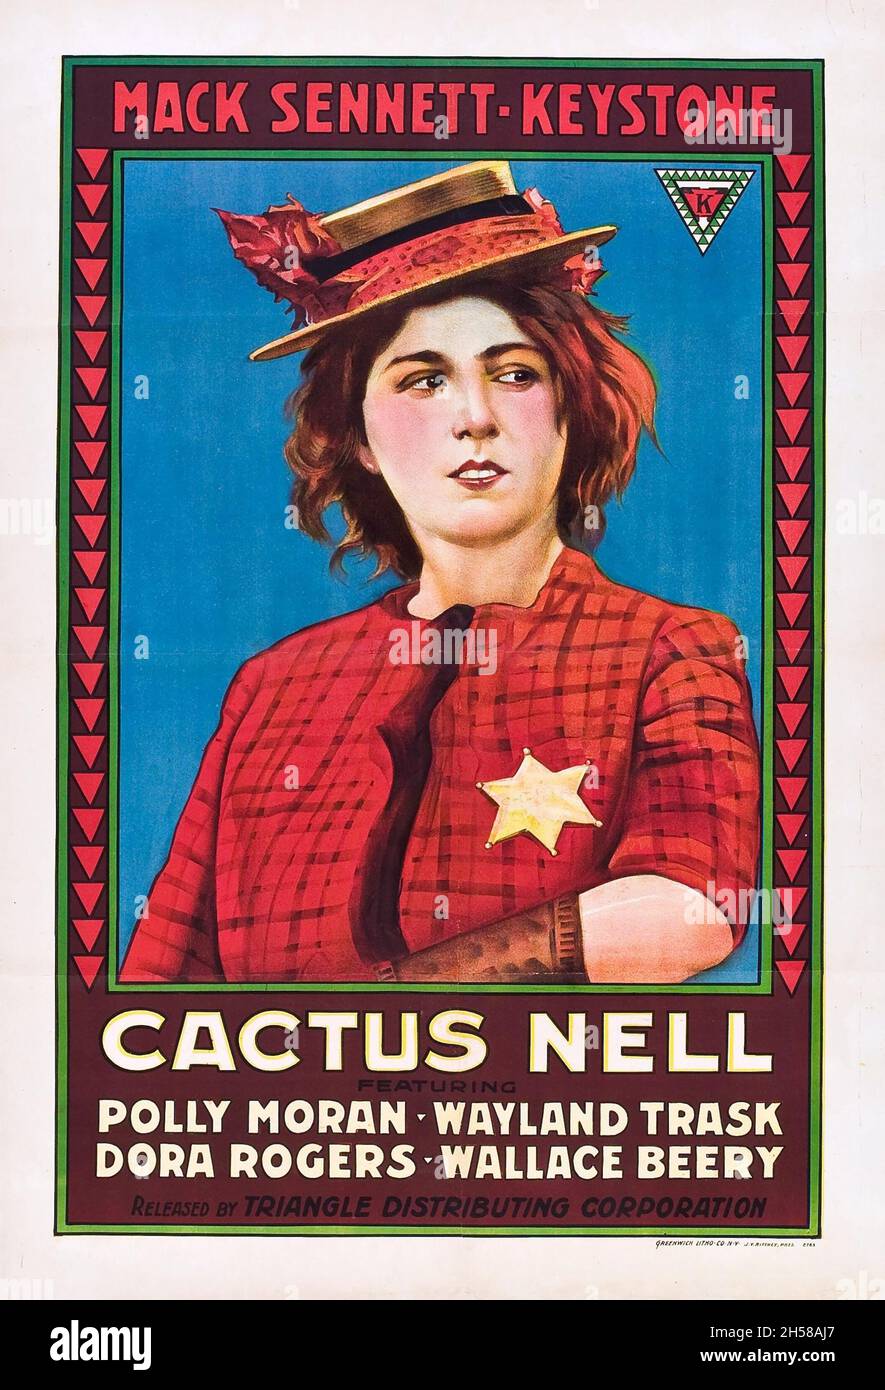 Vintage movie / film poster for the 1917 film Cactus Nell starring Polly Moran – directed by Fred Fishback. Stock Photo